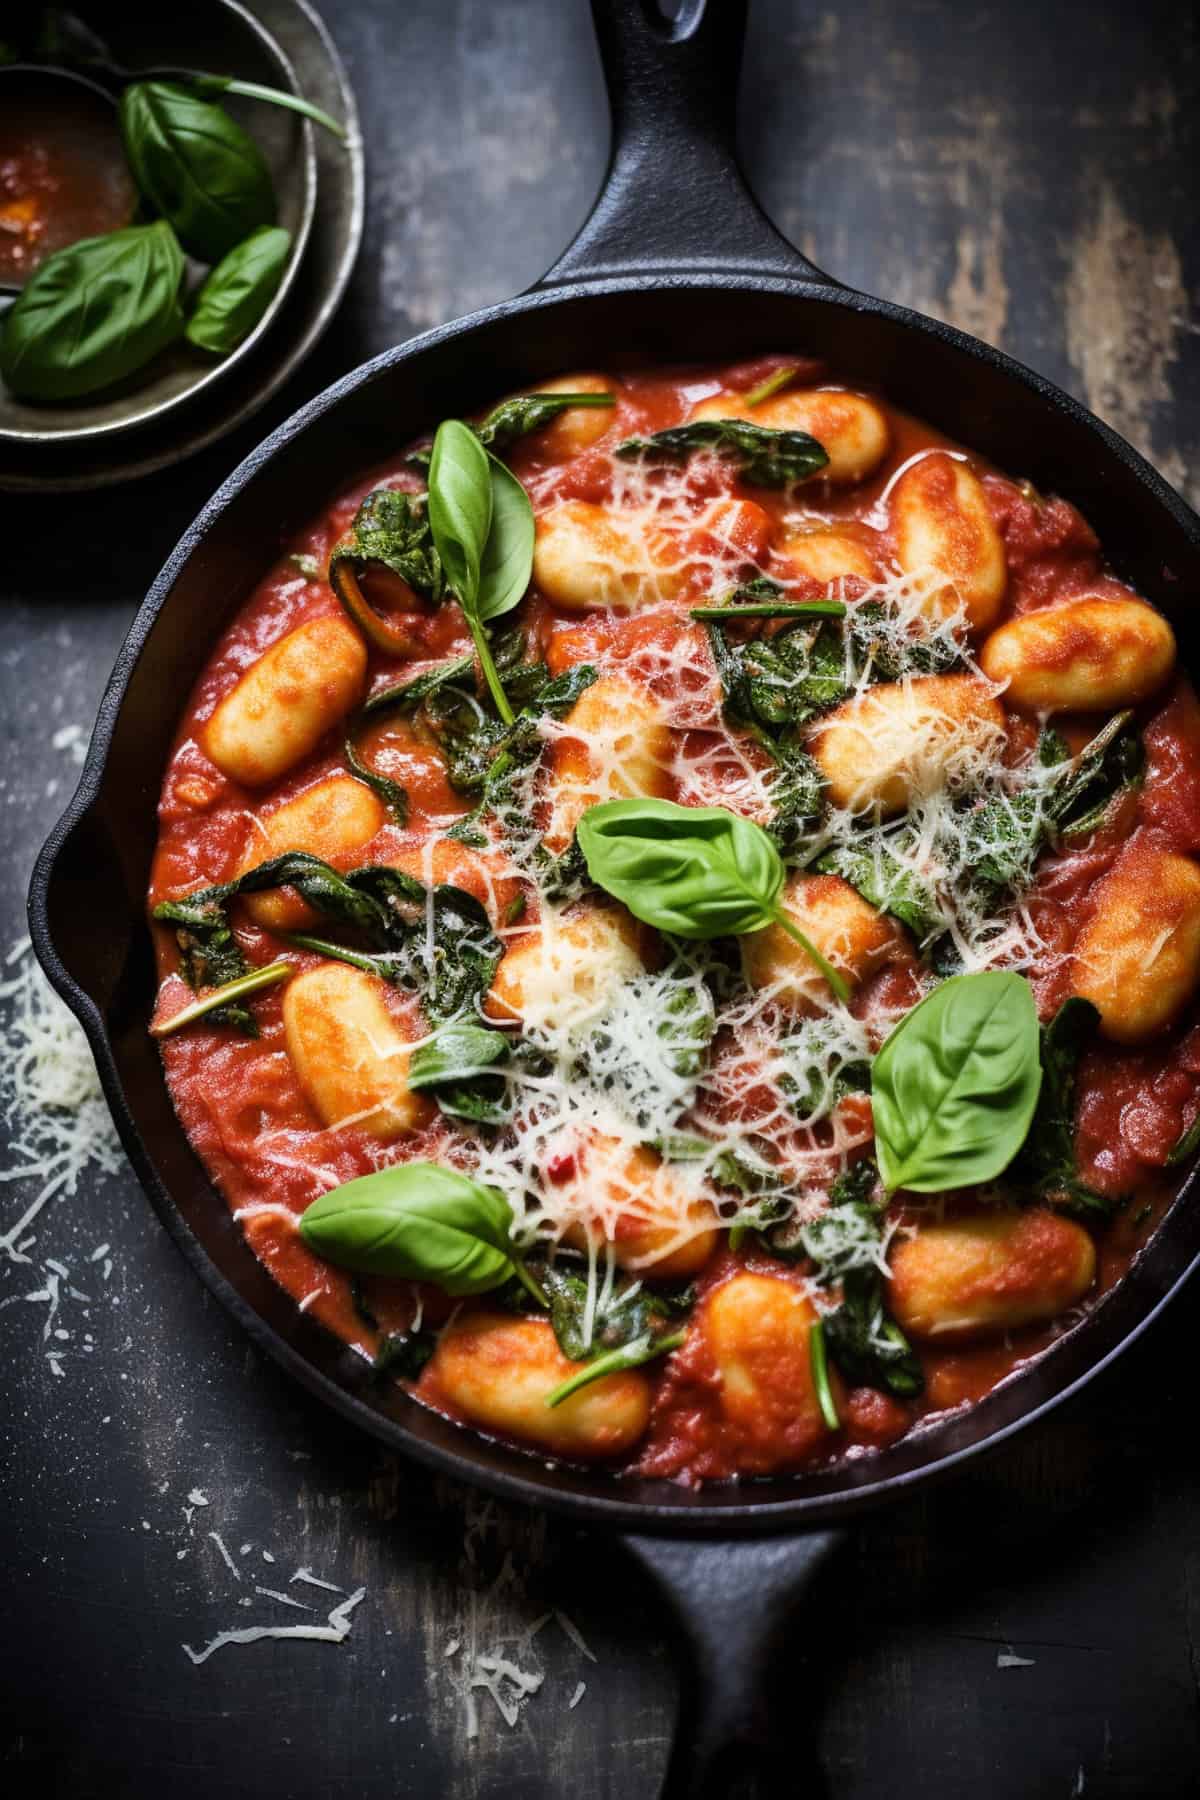 Baked gnocchi with basil and cheese.